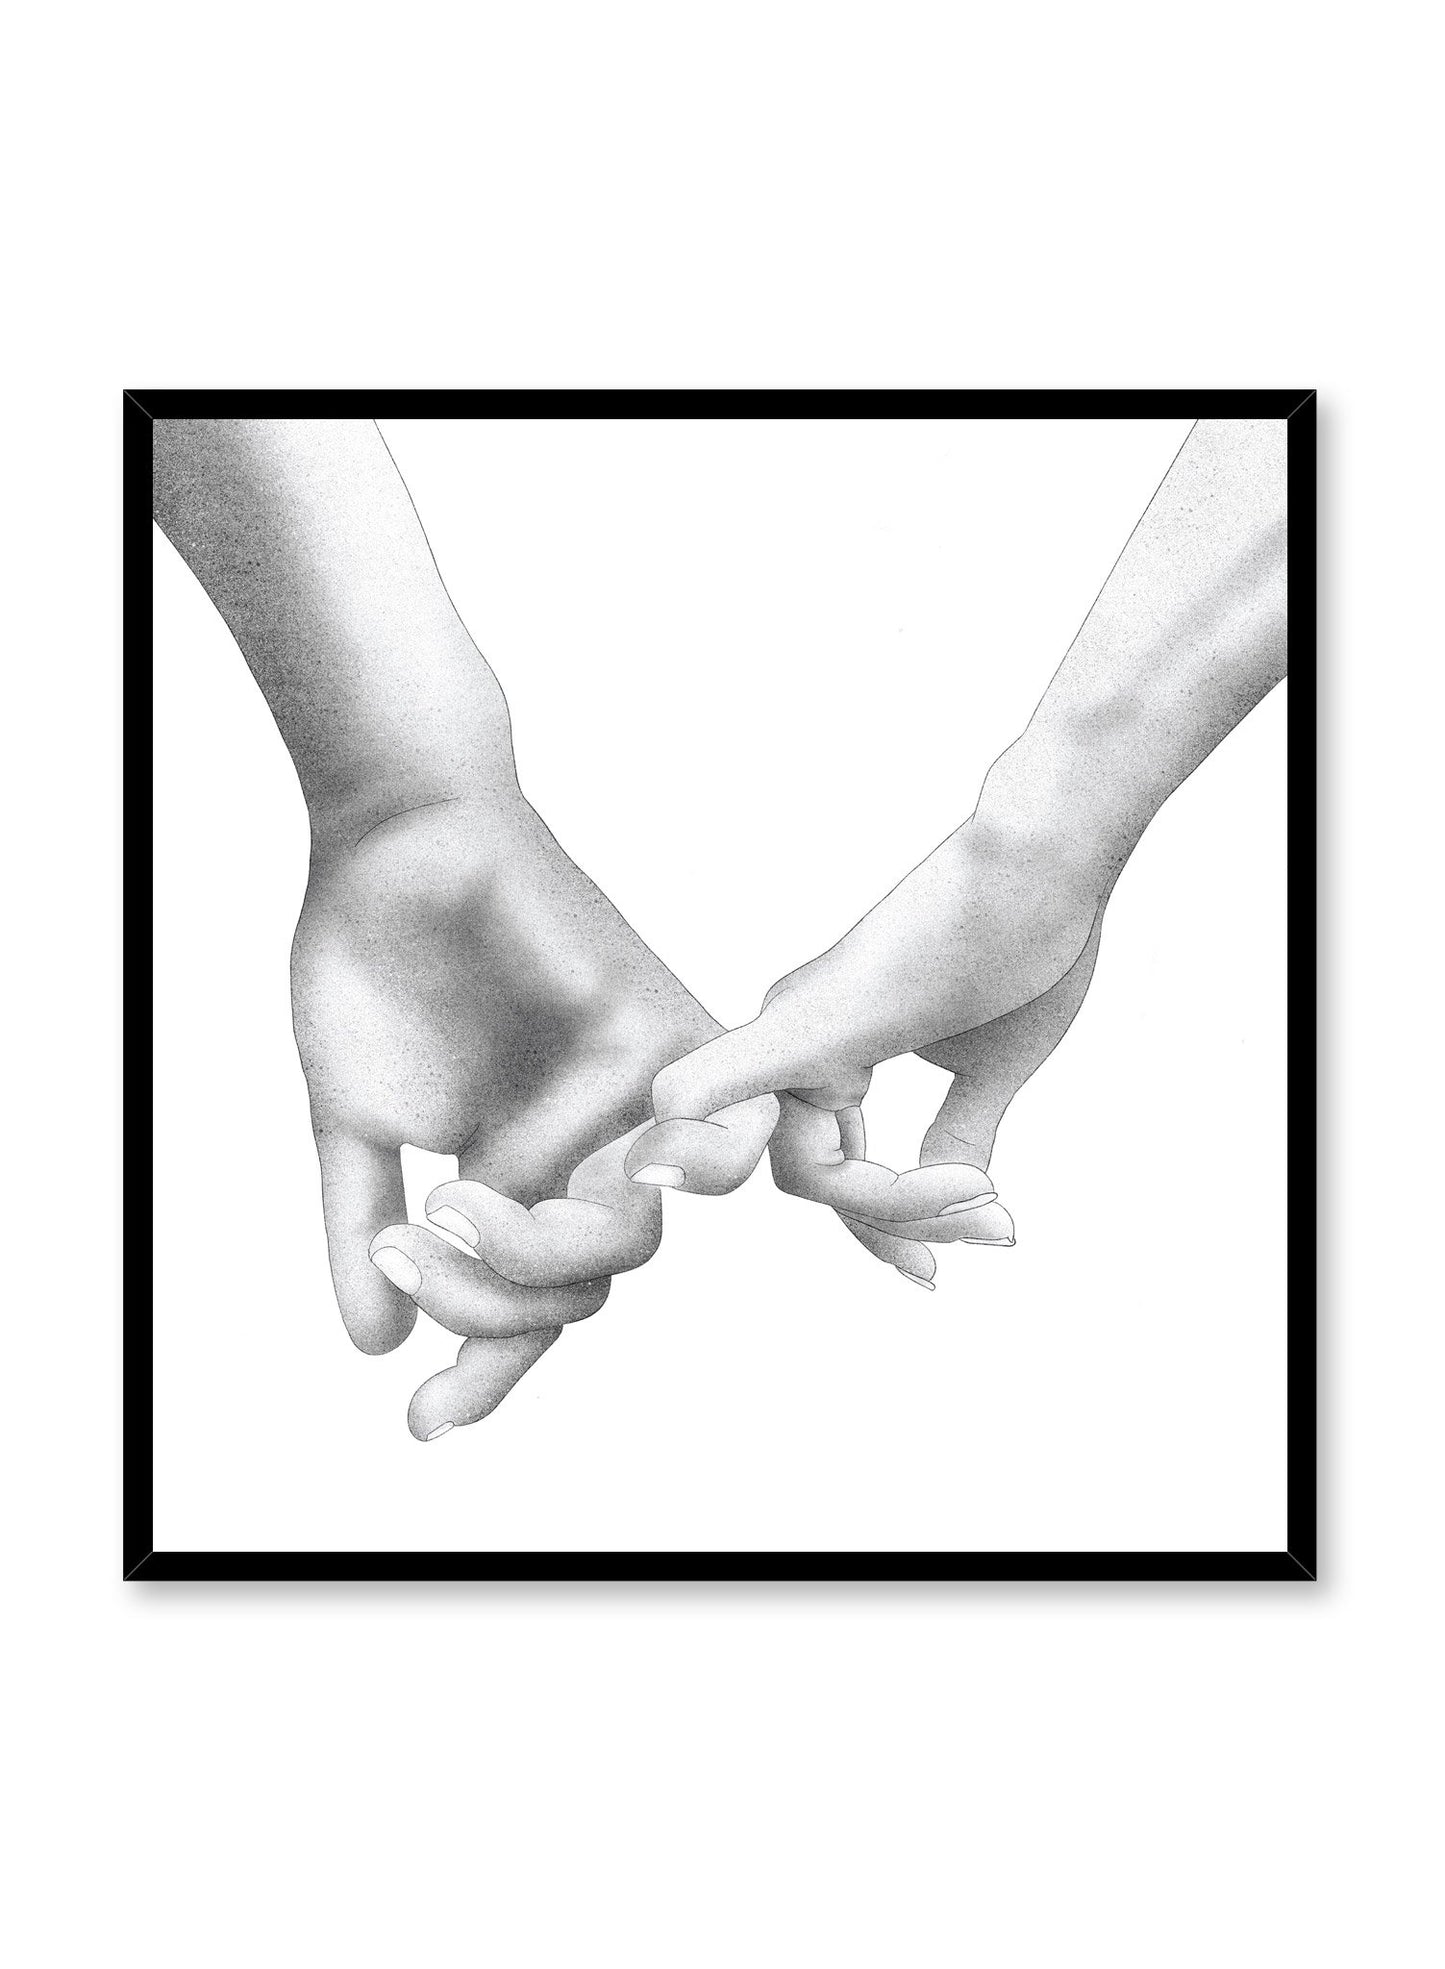 Modern minimalist poster by Opposite Wall with black and white Holding Pinkies illustration in square format